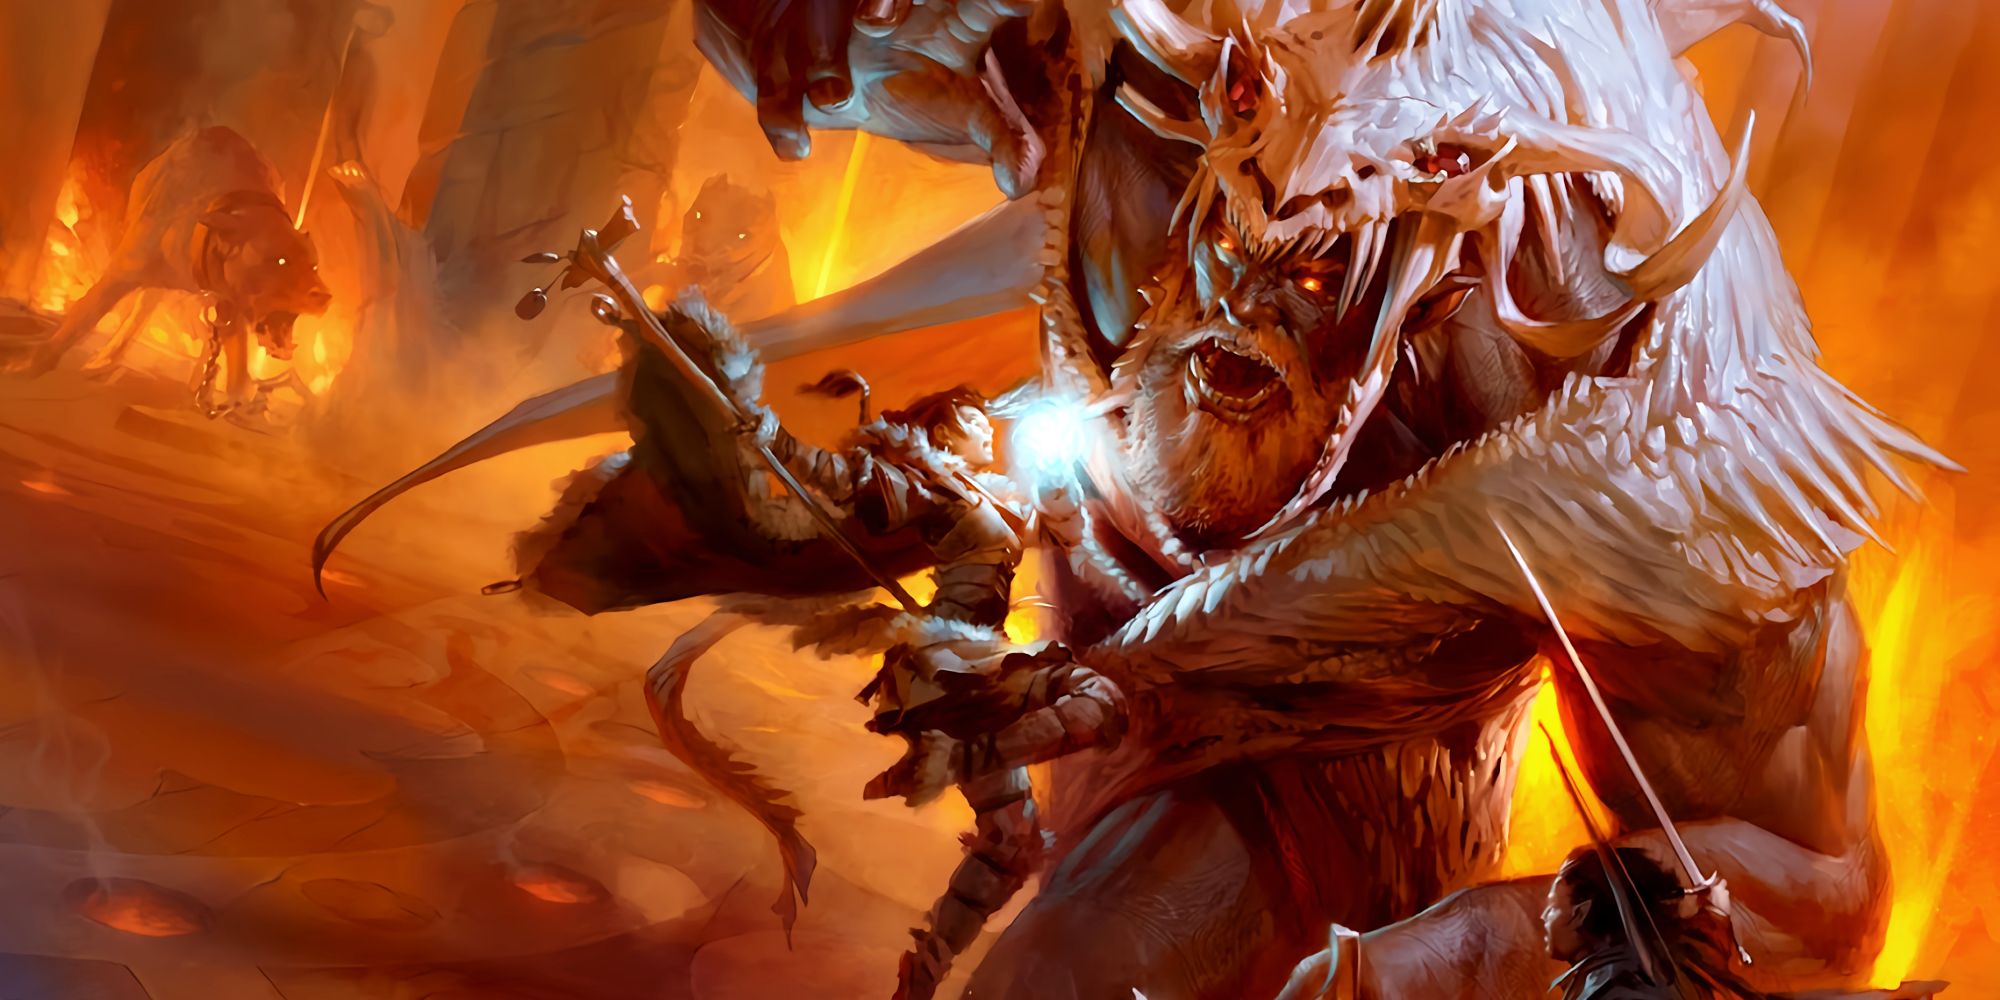 Cover art from the 5e DnD Player's Handbook, featuring characters battling a fire giant.